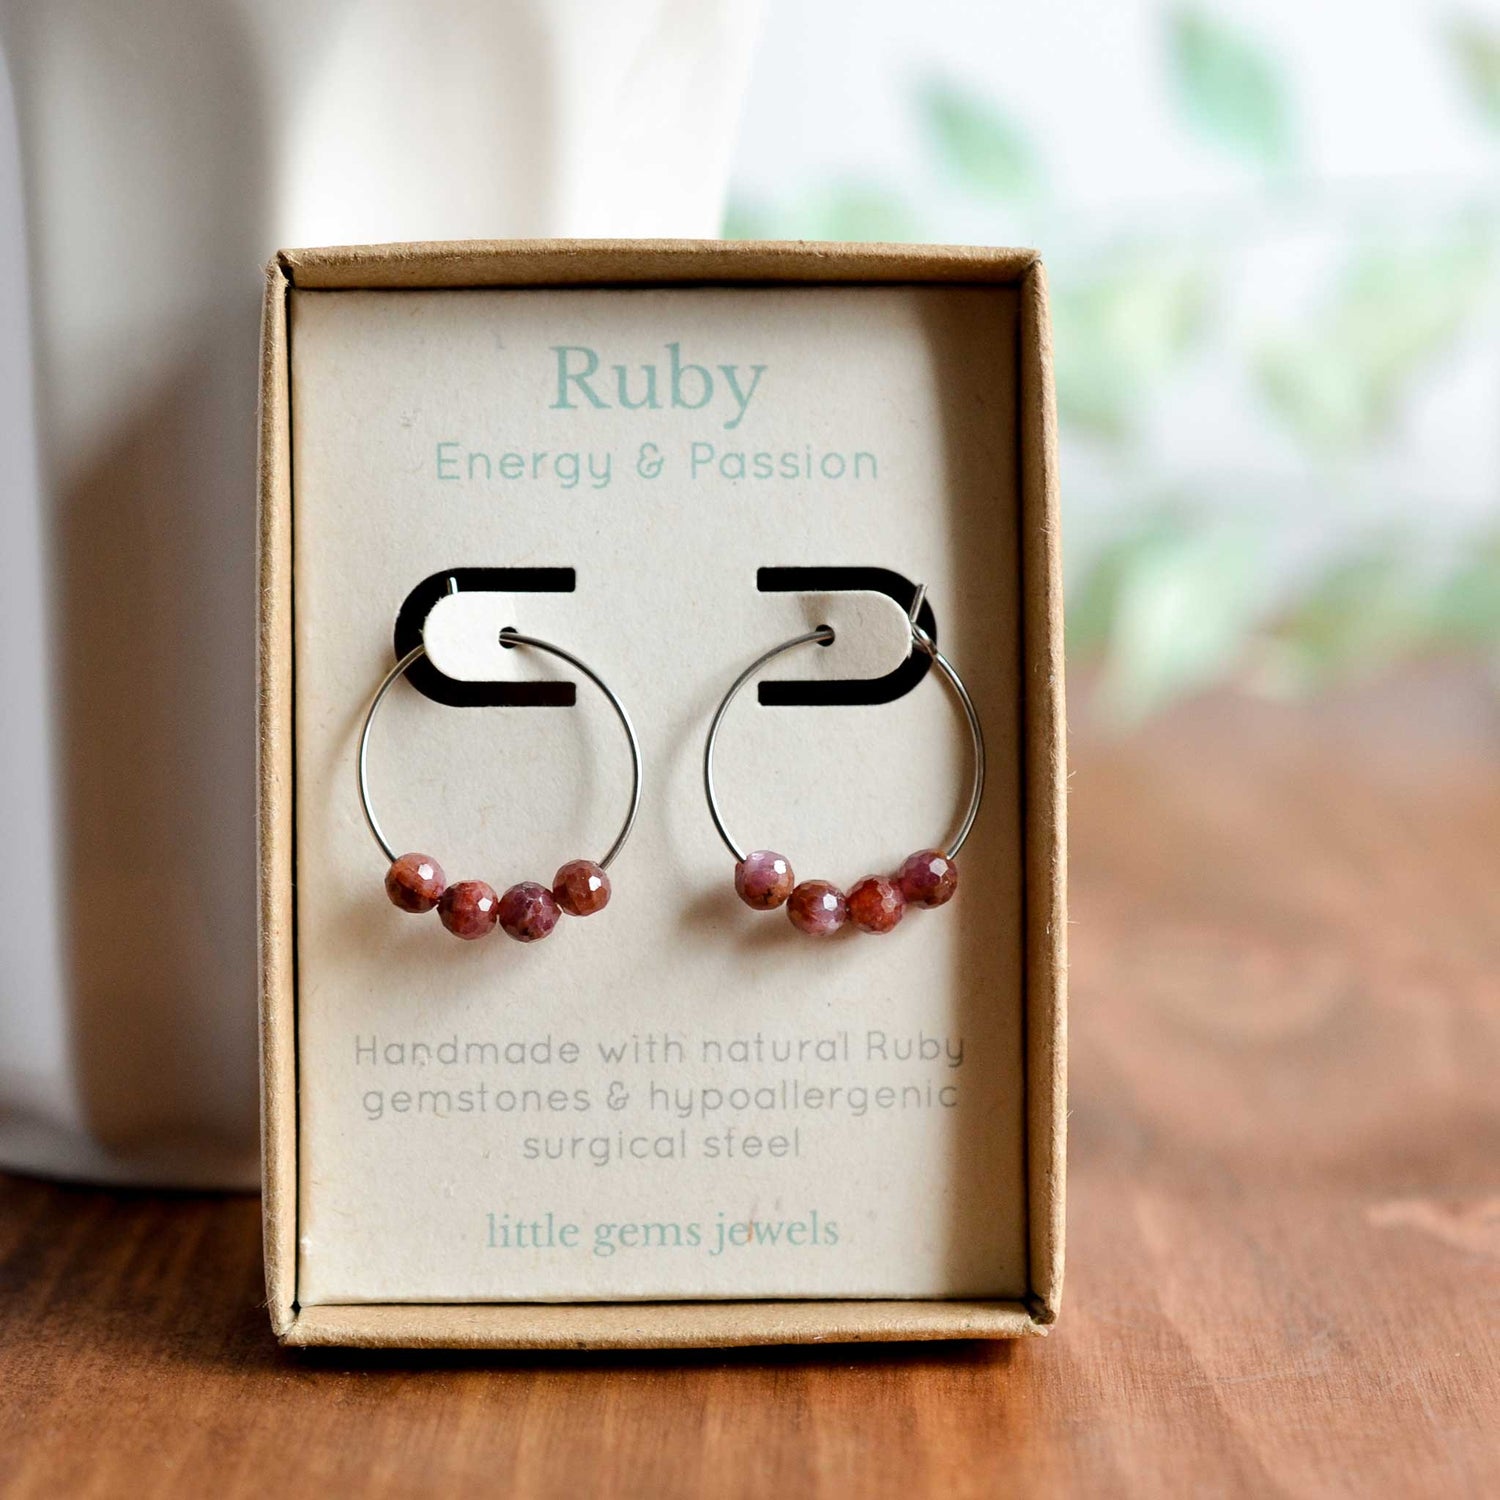 Ruby gemstone for energy and passion hoop earrings in eco-friendly gift box